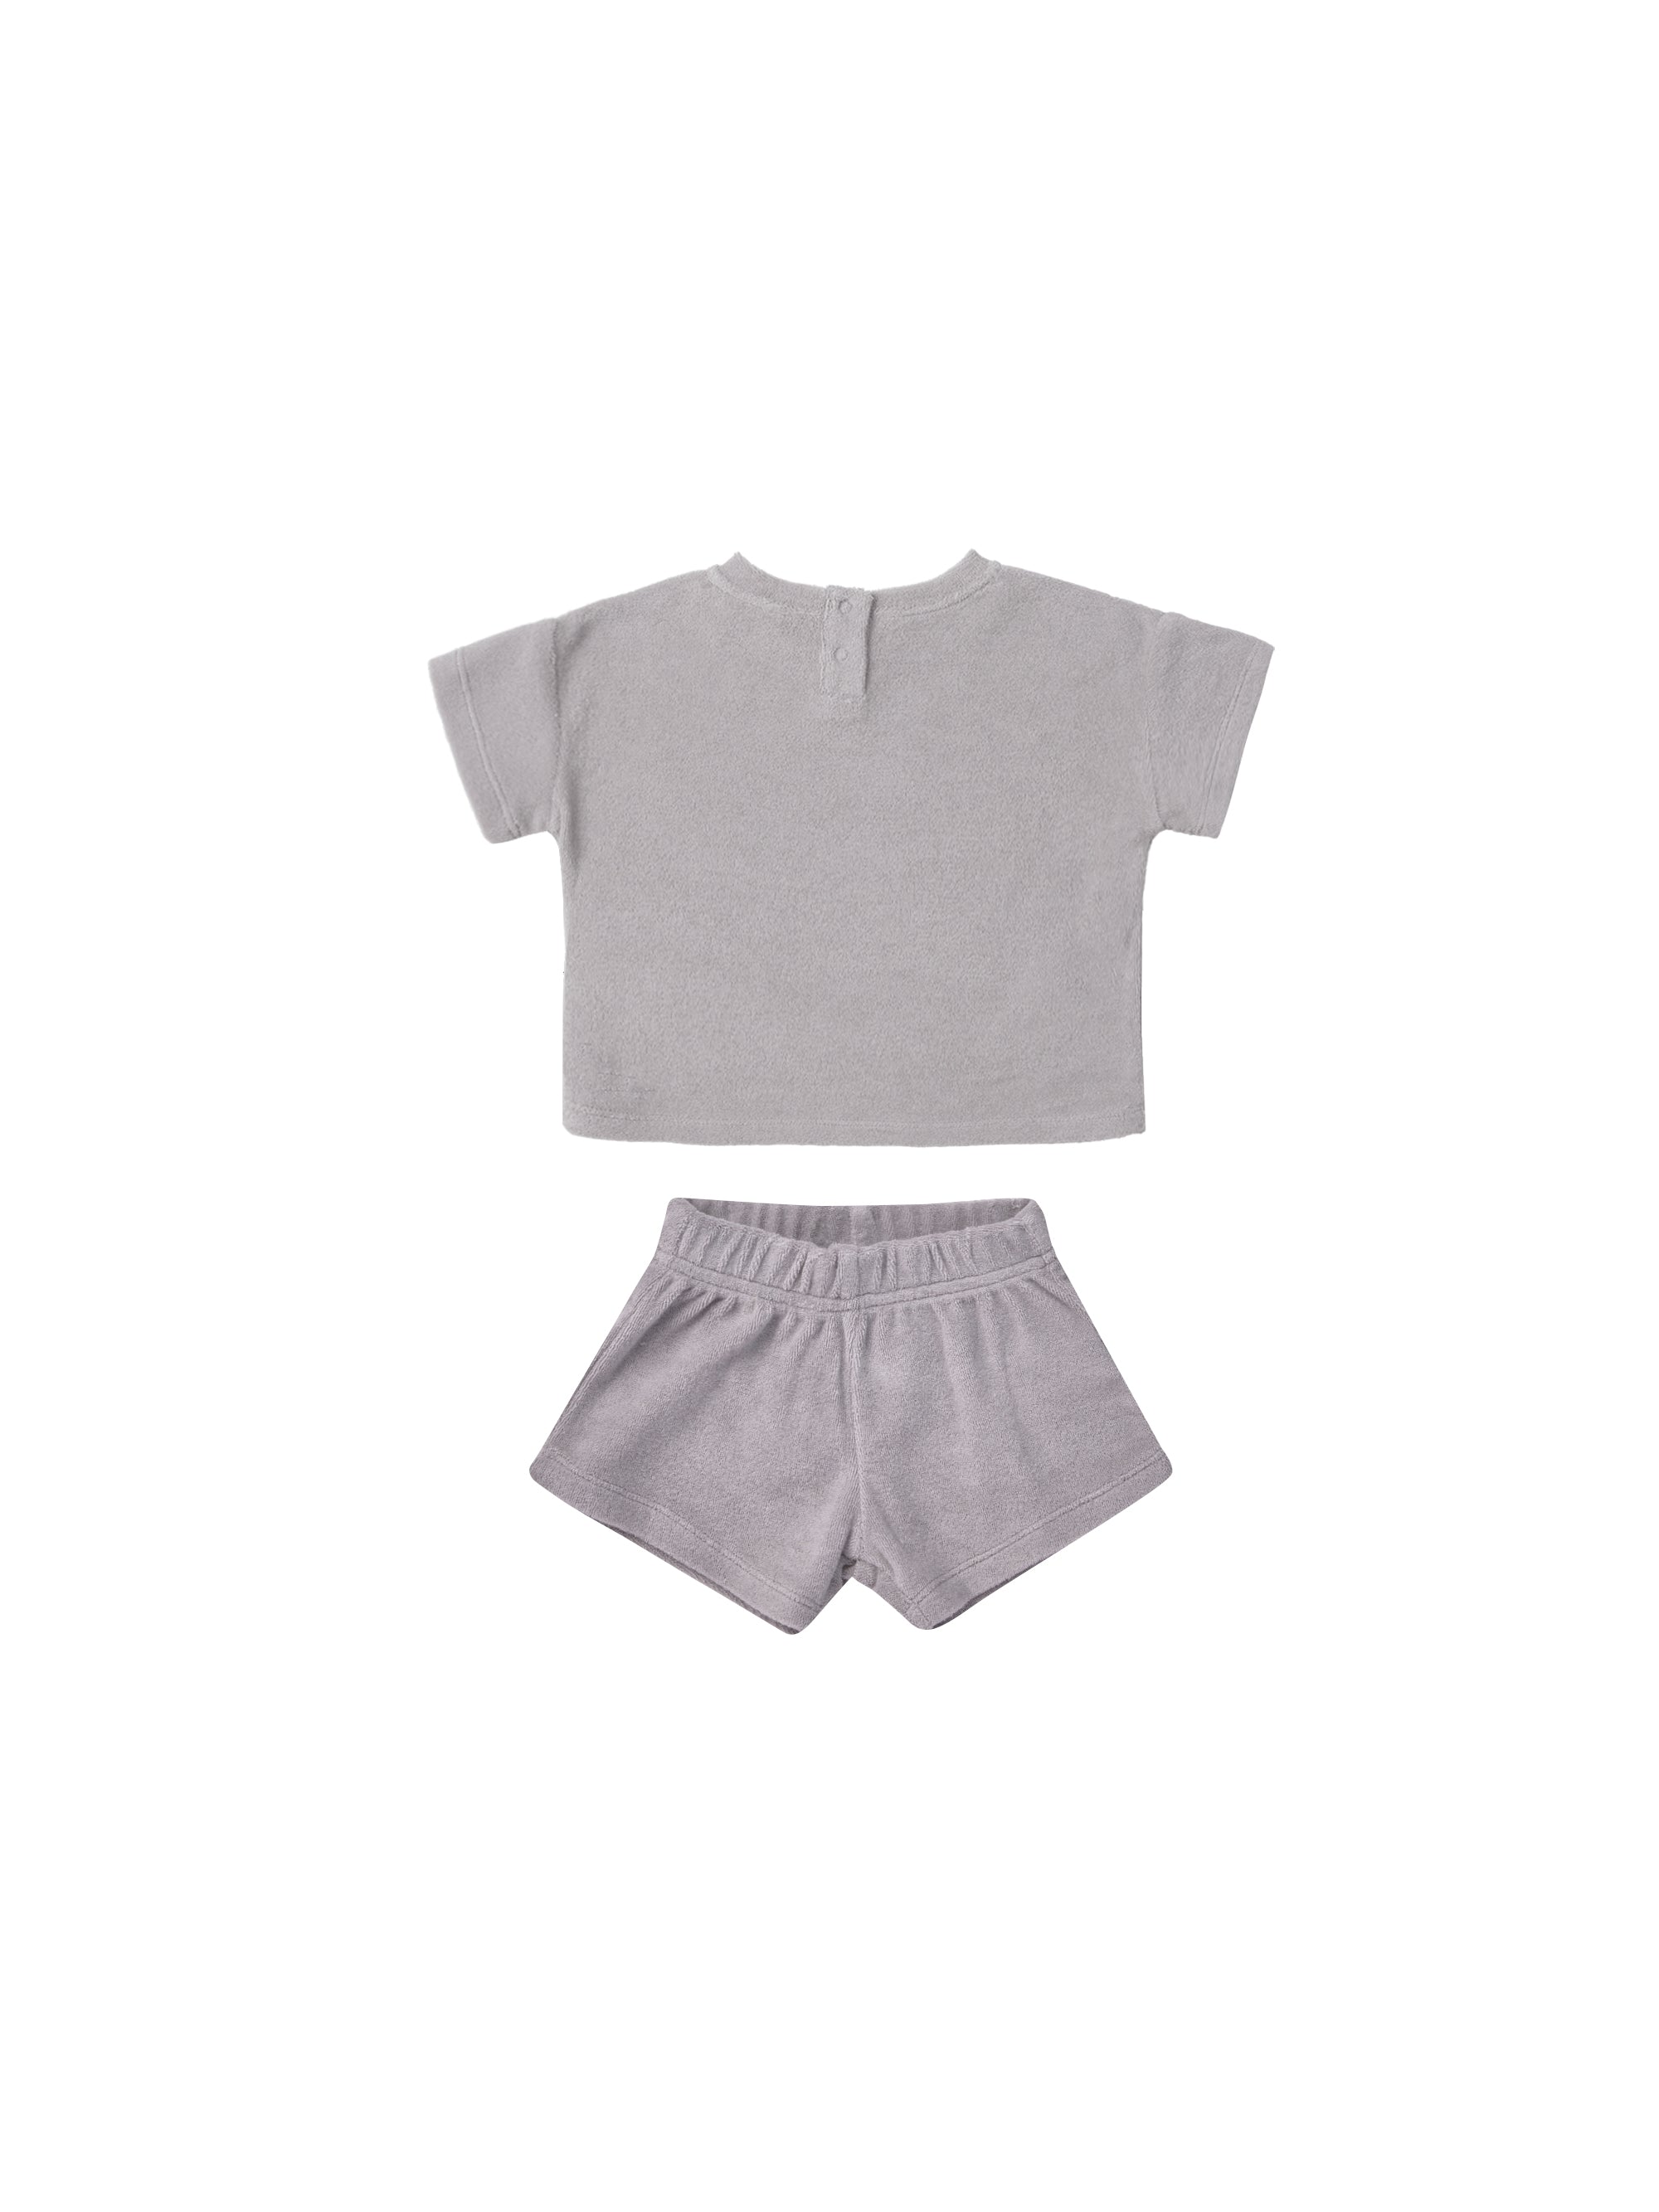 Quincy Mae Terry Tee + Shorts Set - Periwinkle